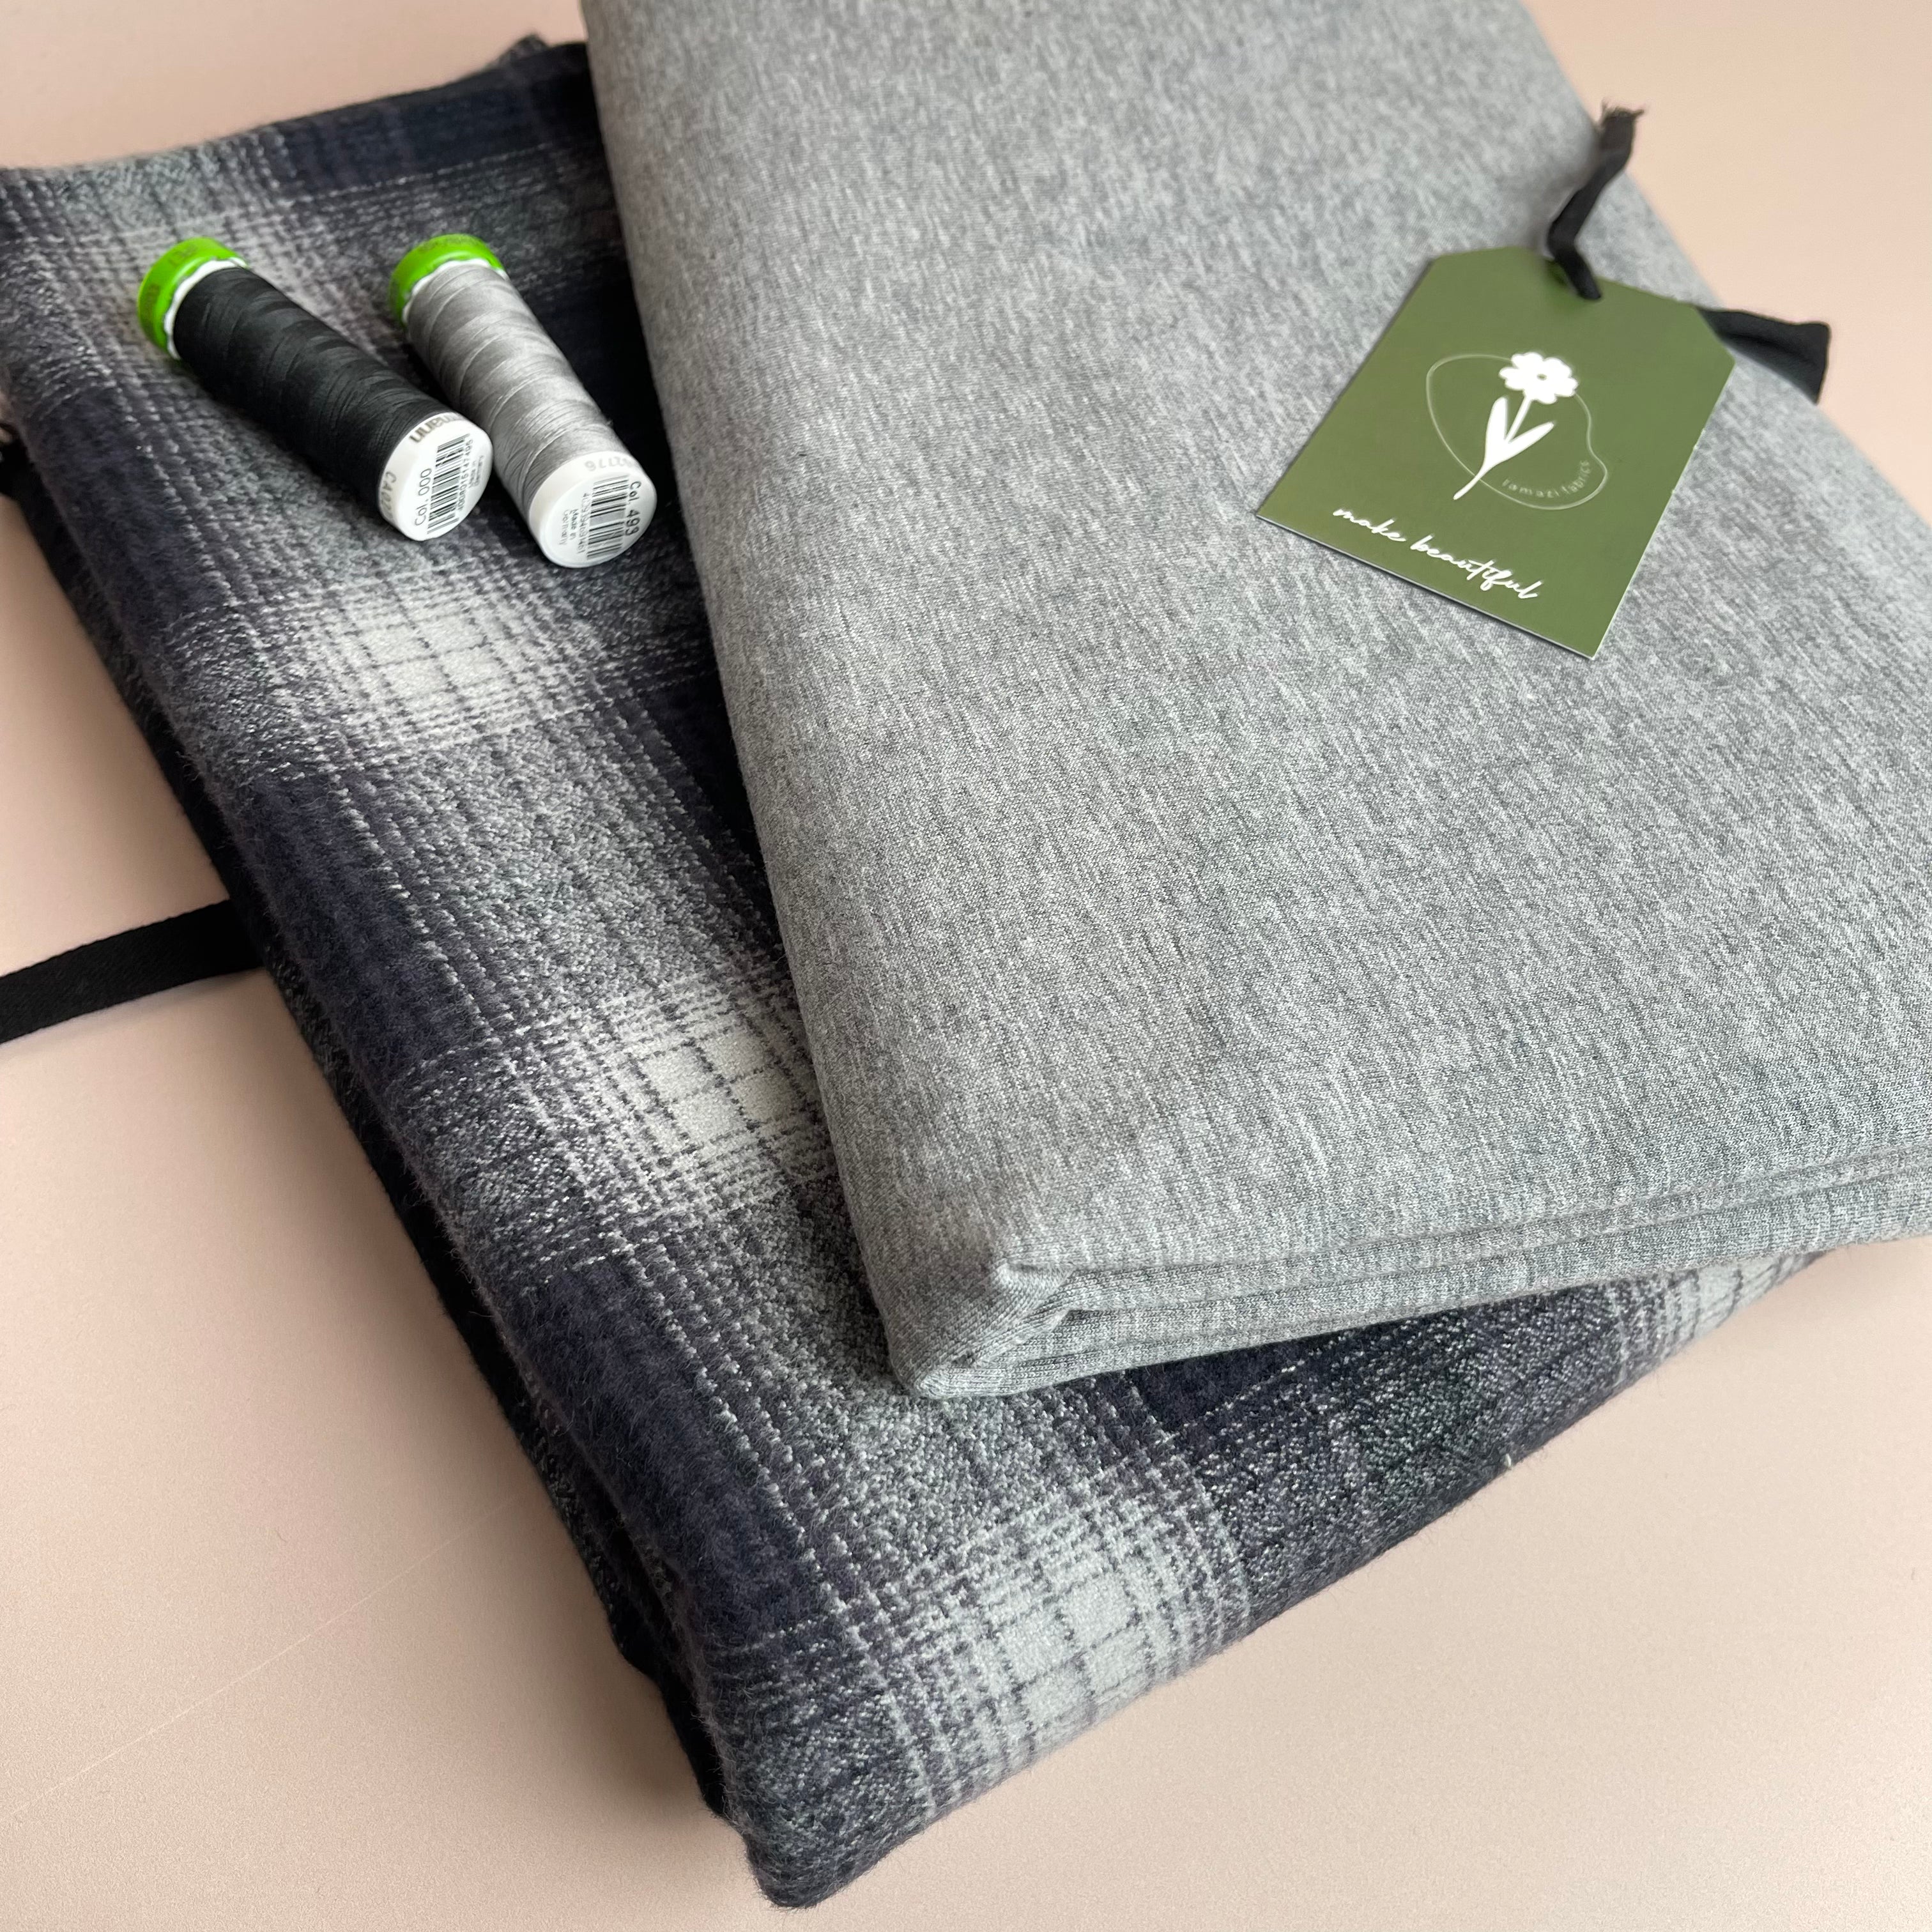 Limited Edition - Luxury Pyjama Kit with Charcoal Check Cotton Flannel